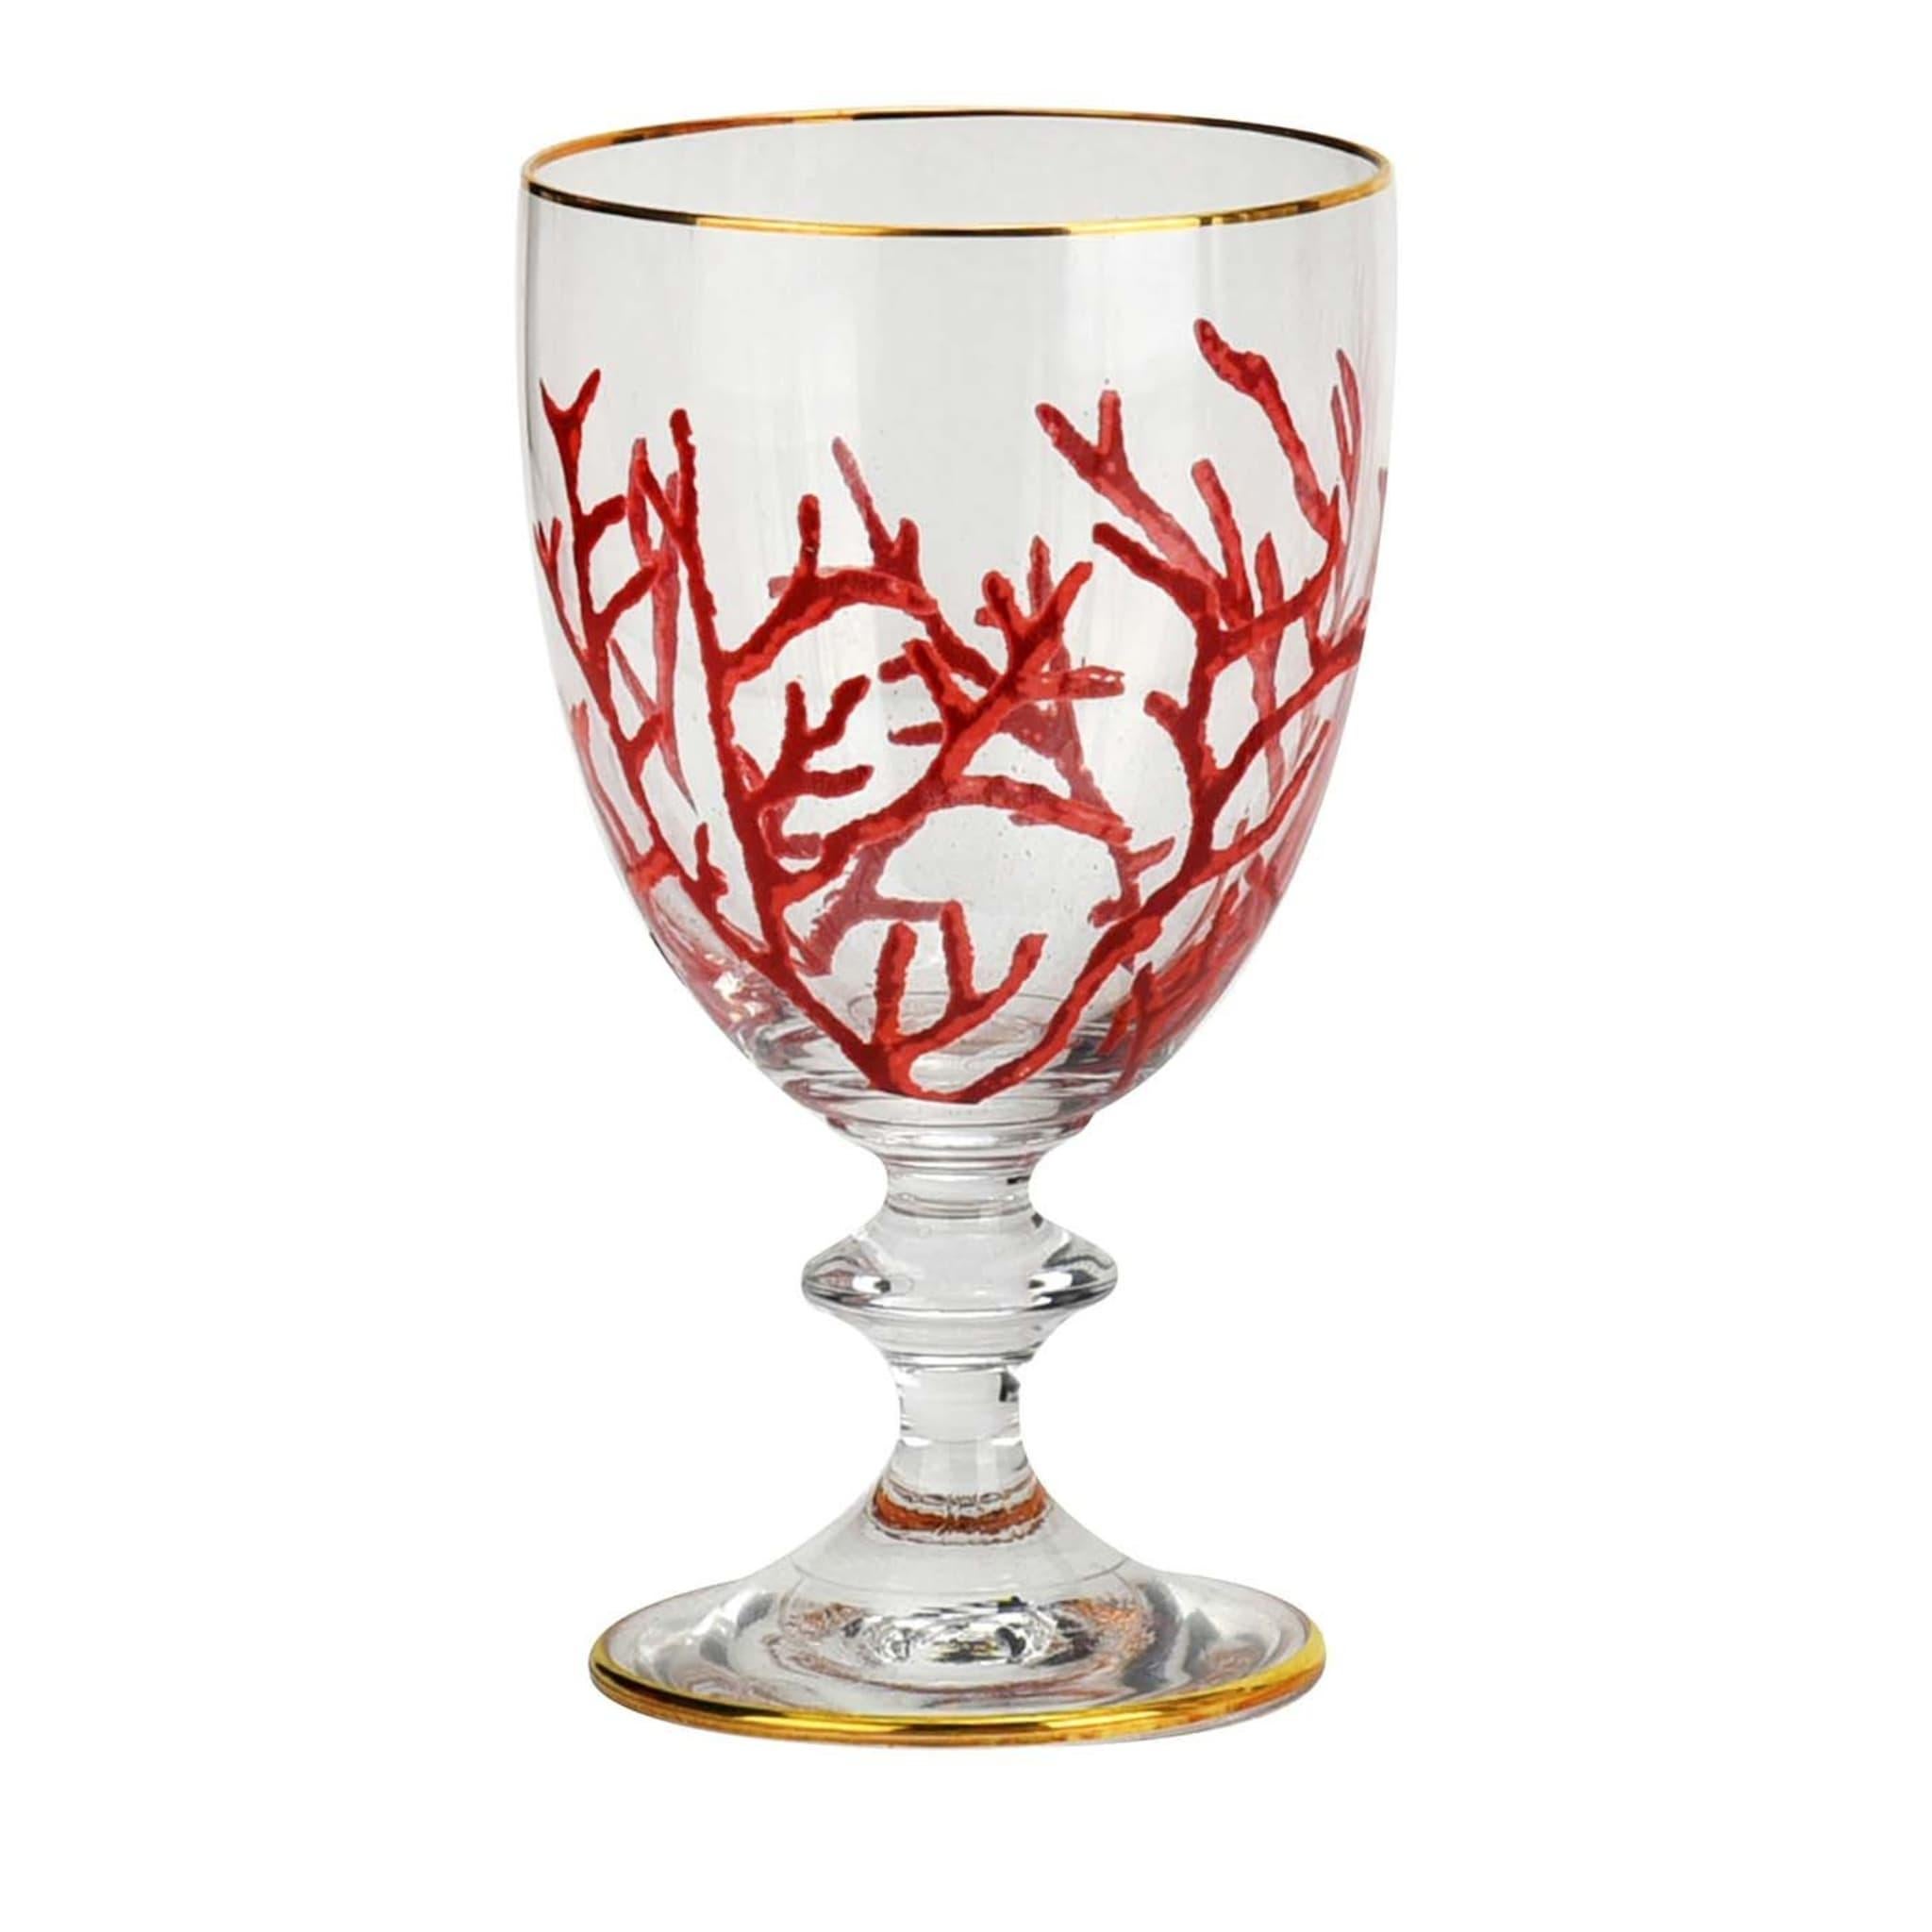 The alluring qualities of this splendid water glass are enhanced by a handmade decoration depicting an elegant red coral on the bowl. Exquisitely handcrafted of crystal, this piece is adorned with a golden finish on the rims of the bowl and of the